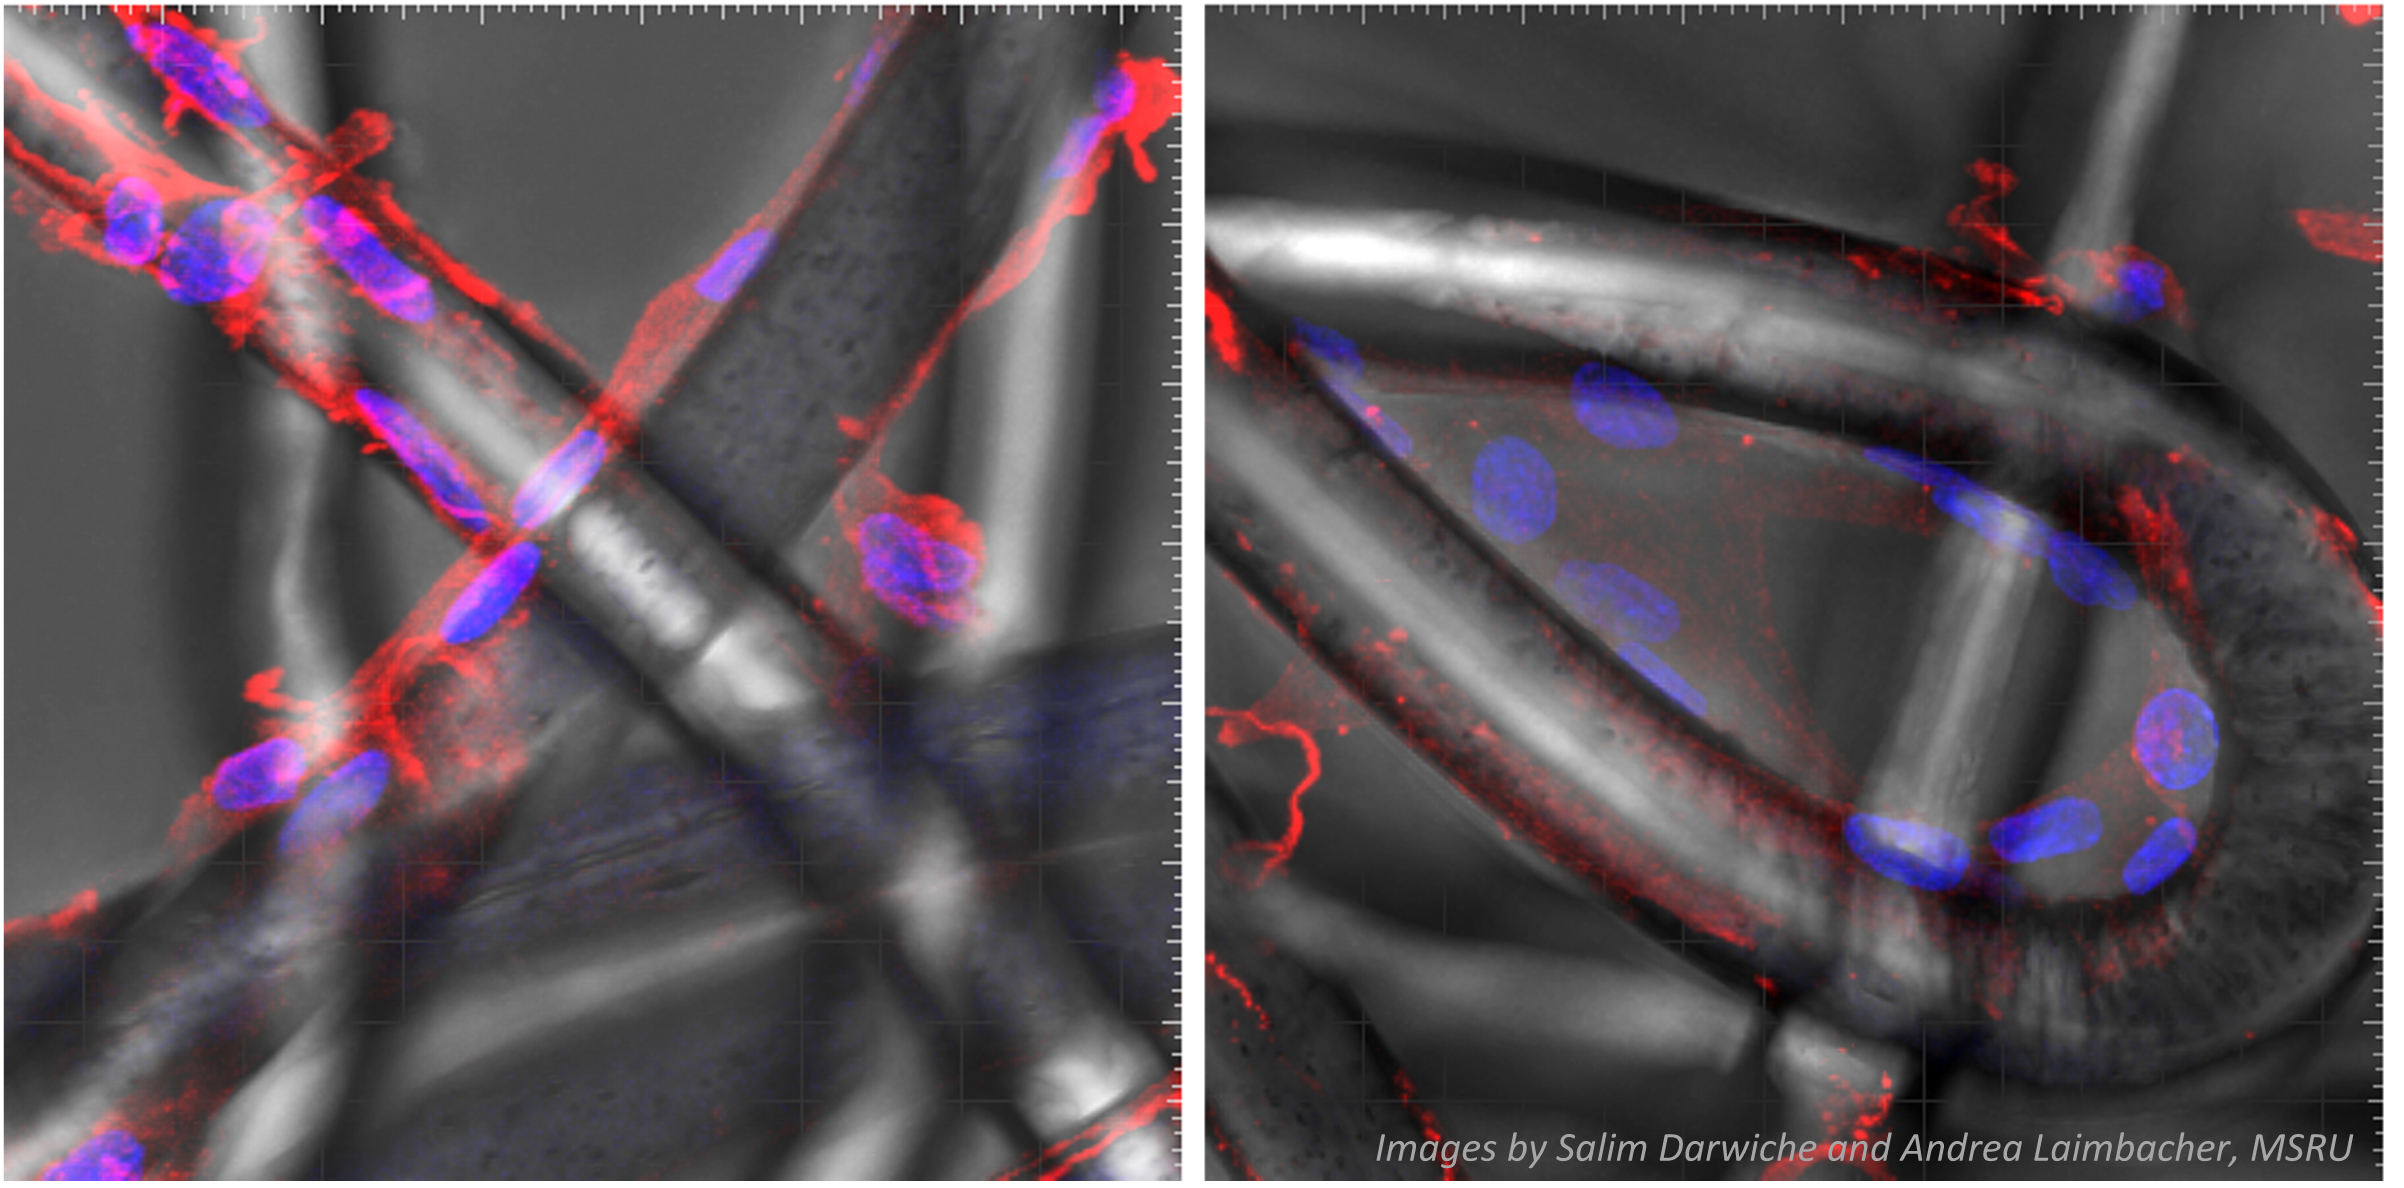 Cells extracted from a sheep’s nucleus pulposus tissue in a cervical intervertebral disc were expanded in culture and seeded on a polyethylene terephthalate scaffold. The fibers are shown above as well as the cell actin cytoskeleton in red and the cell nuclei in blue. The aim of this project is to tissue engineer intervertebral disc components and to implant these constructs for intervertebral disc replacement. Images taken by Salim Darwiche and Andrea Laimbacher, MSRU